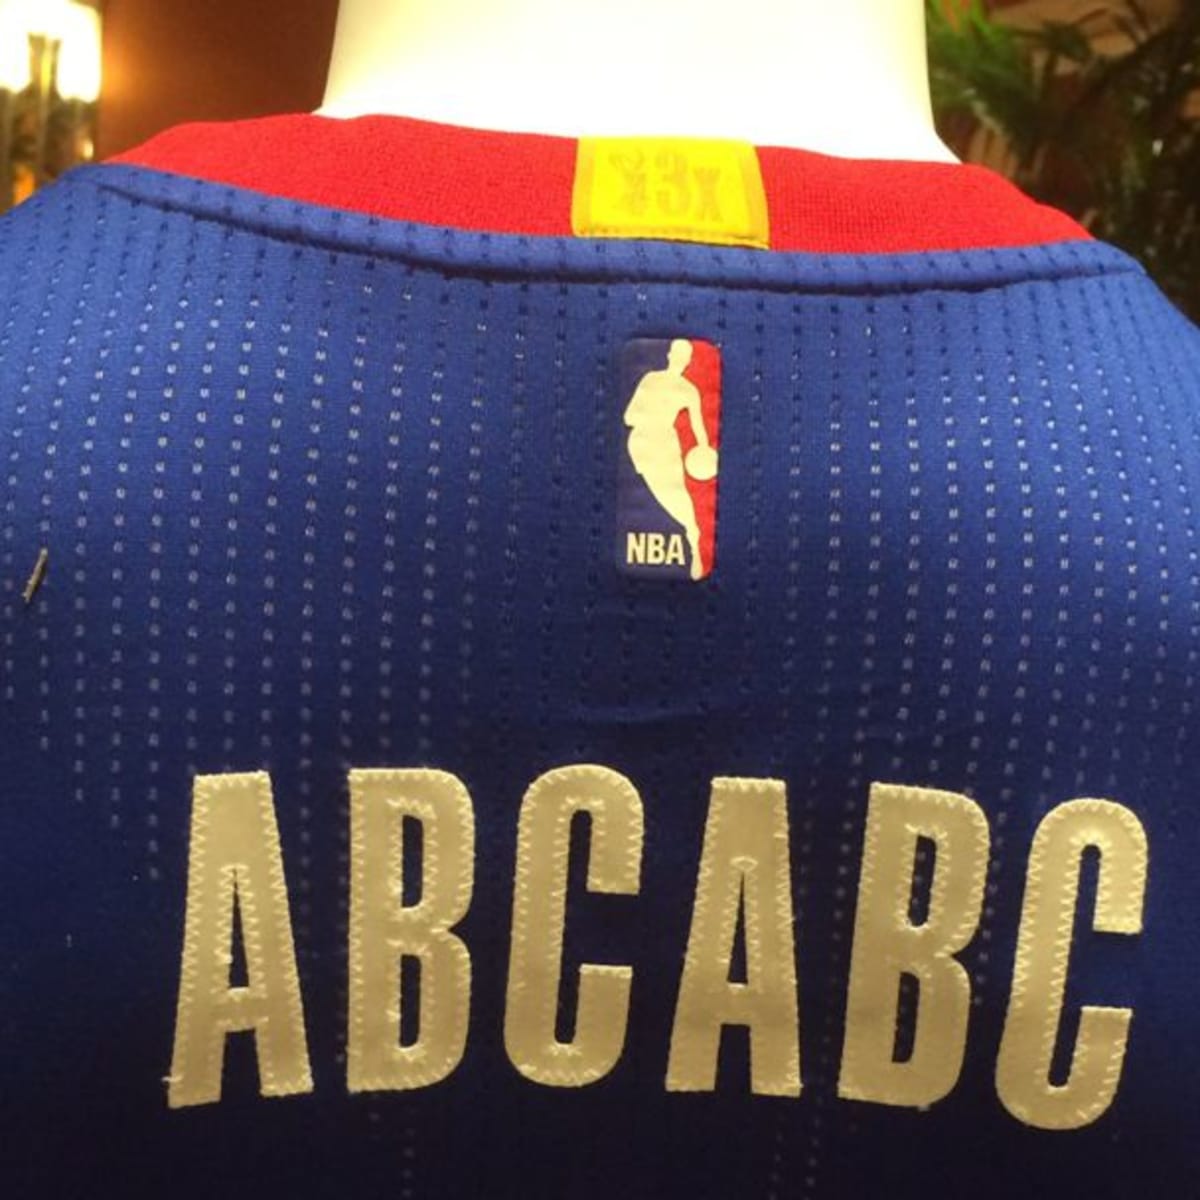 Everything you NEED to know about CHAMPION NBA JERSEYS (how to